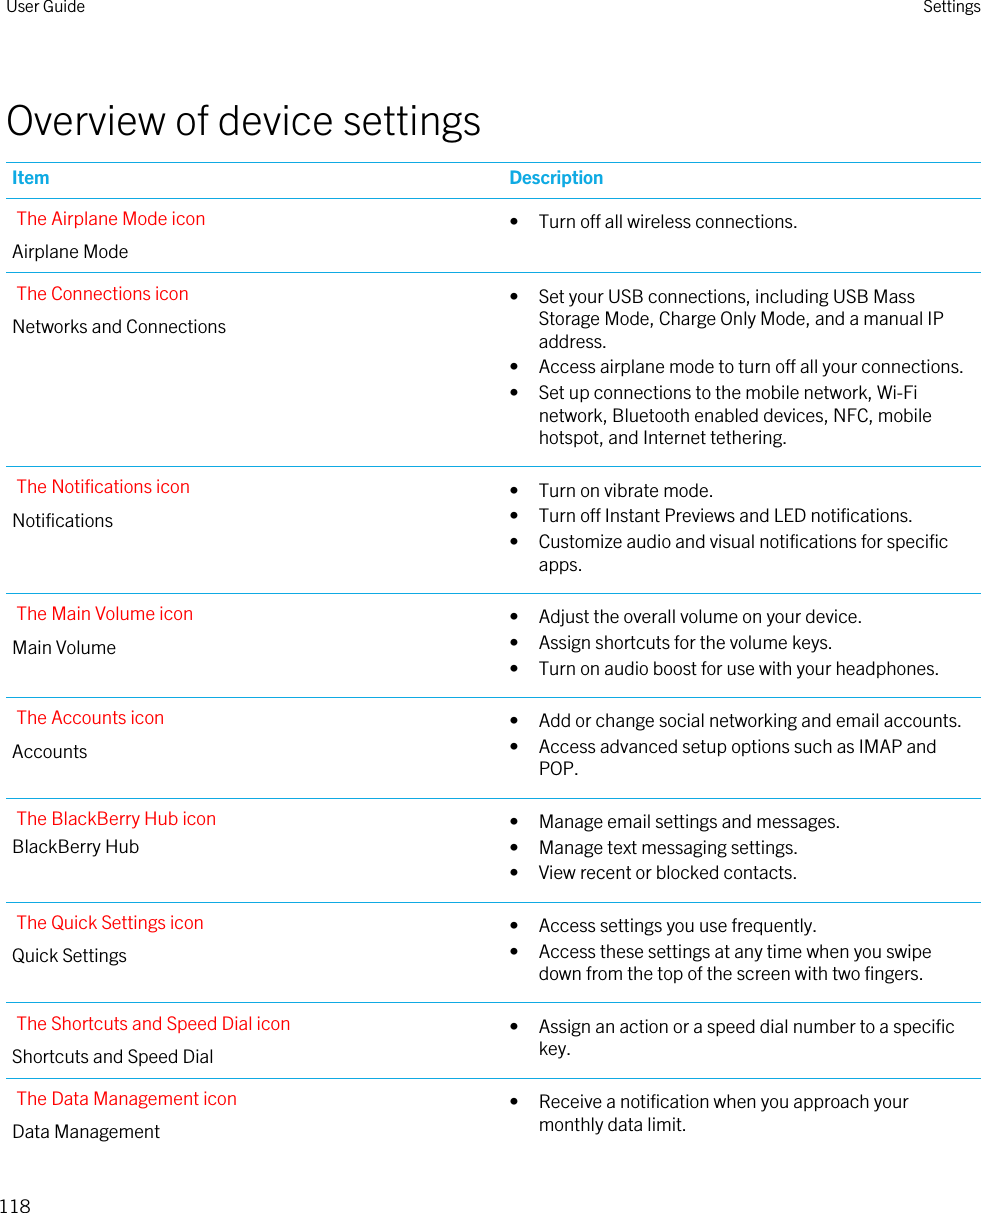 Overview of device settingsItem DescriptionThe Airplane Mode iconAirplane Mode• Turn off all wireless connections.The Connections iconNetworks and Connections• Set your USB connections, including USB Mass Storage Mode, Charge Only Mode, and a manual IP address.• Access airplane mode to turn off all your connections.• Set up connections to the mobile network, Wi-Fi network, Bluetooth enabled devices, NFC, mobile hotspot, and Internet tethering.The Notifications iconNotifications• Turn on vibrate mode.• Turn off Instant Previews and LED notifications.• Customize audio and visual notifications for specific apps.The Main Volume iconMain Volume• Adjust the overall volume on your device.• Assign shortcuts for the volume keys.• Turn on audio boost for use with your headphones.The Accounts iconAccounts• Add or change social networking and email accounts.• Access advanced setup options such as IMAP and POP.The BlackBerry Hub iconBlackBerry Hub• Manage email settings and messages.• Manage text messaging settings.• View recent or blocked contacts.The Quick Settings iconQuick Settings• Access settings you use frequently.• Access these settings at any time when you swipe down from the top of the screen with two fingers.The Shortcuts and Speed Dial iconShortcuts and Speed Dial• Assign an action or a speed dial number to a specific key.The Data Management iconData Management• Receive a notification when you approach your monthly data limit.User Guide Settings118